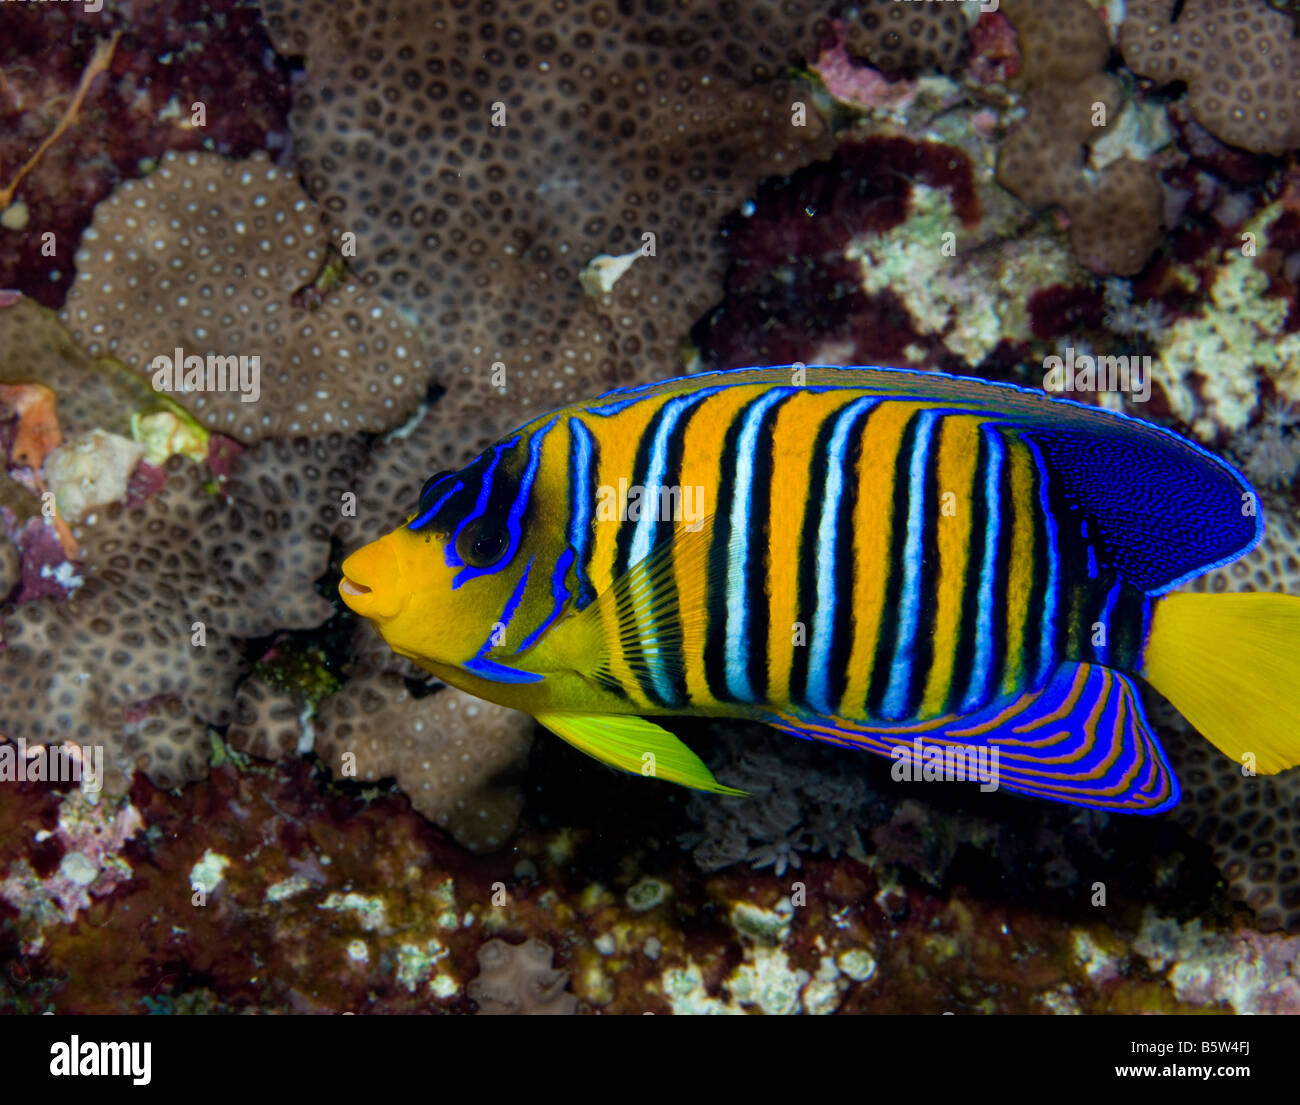 A Regal angelfish (Pygoplites diacanthus) on Daedalus Reef, in the Southern Red Sea. Stock Photo